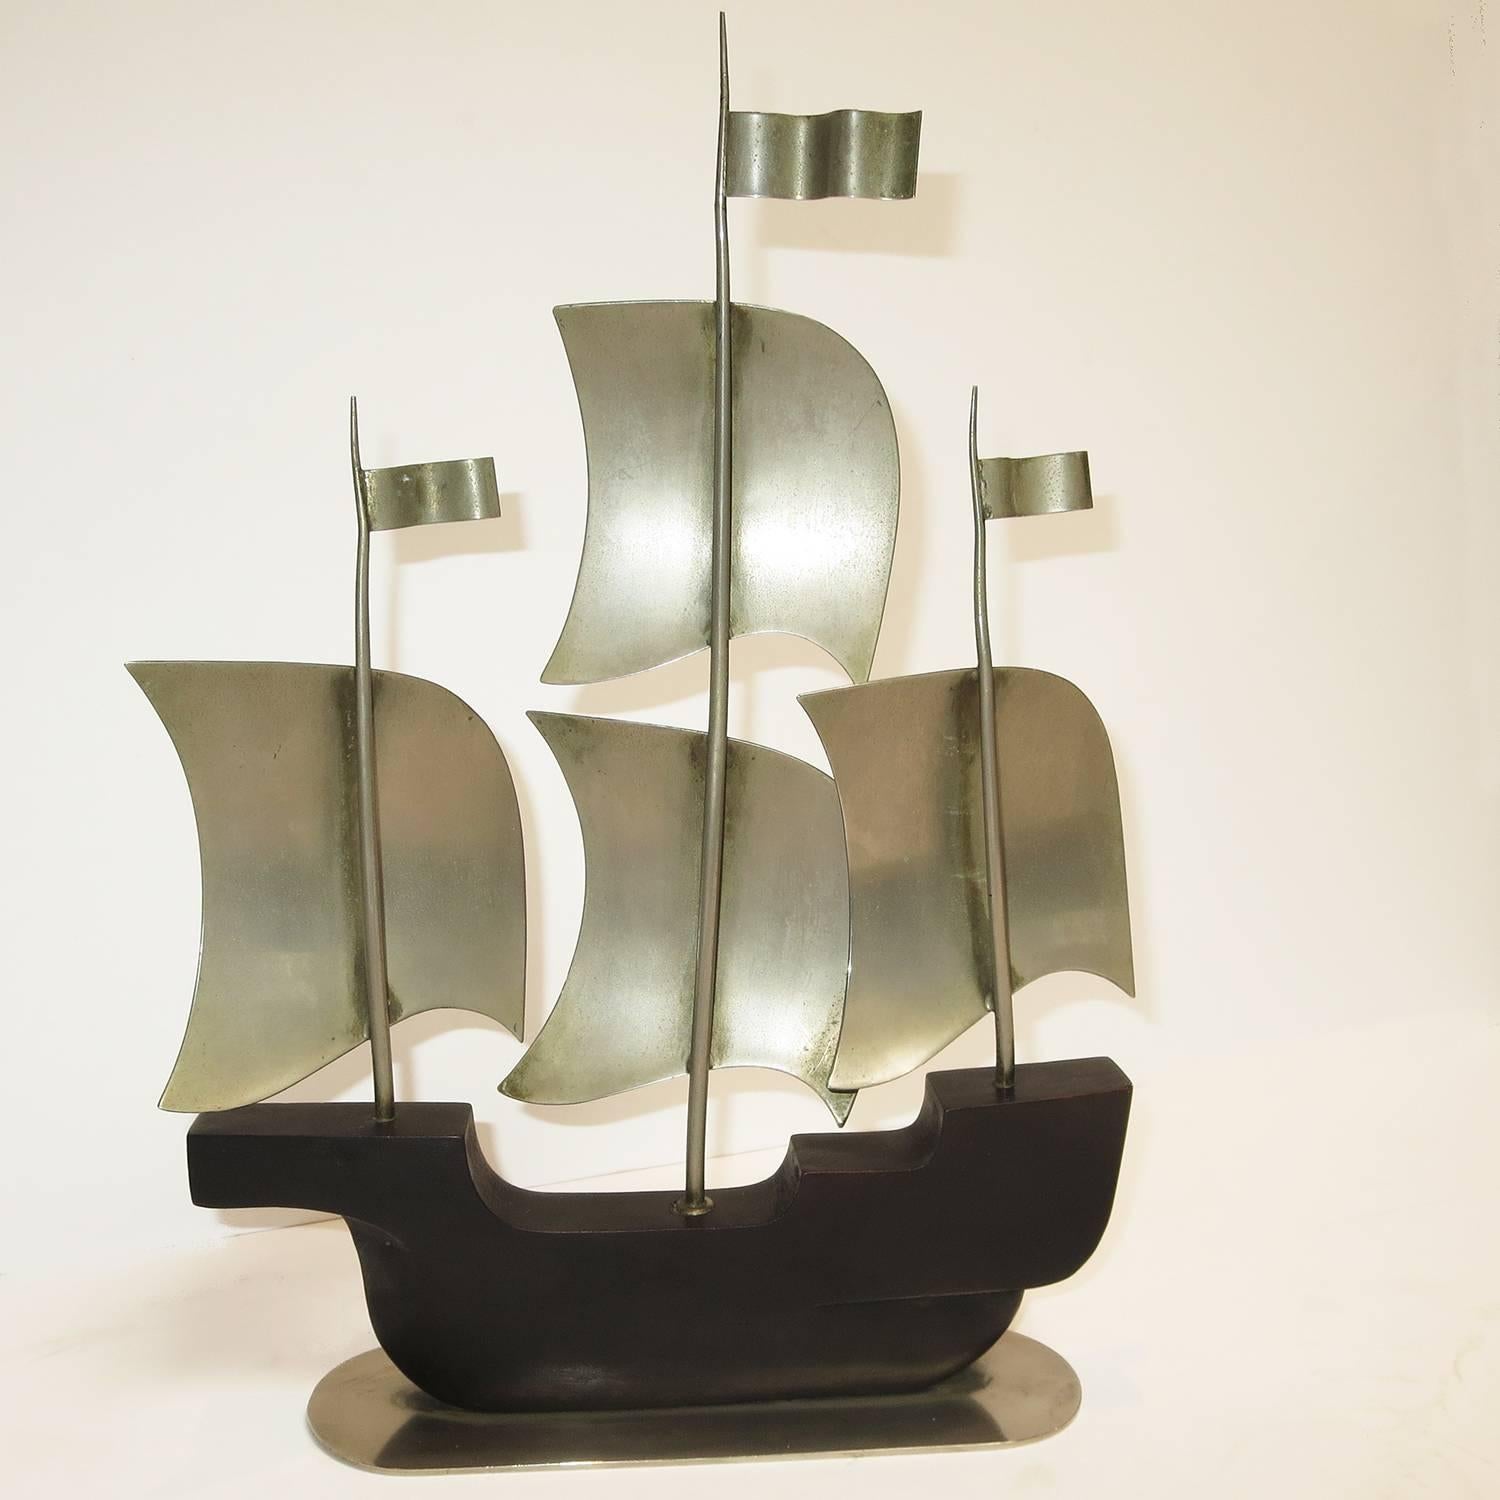 Plated Hagenauer Art Deco Ship Sculpture in Wood and Nickelled Bronze